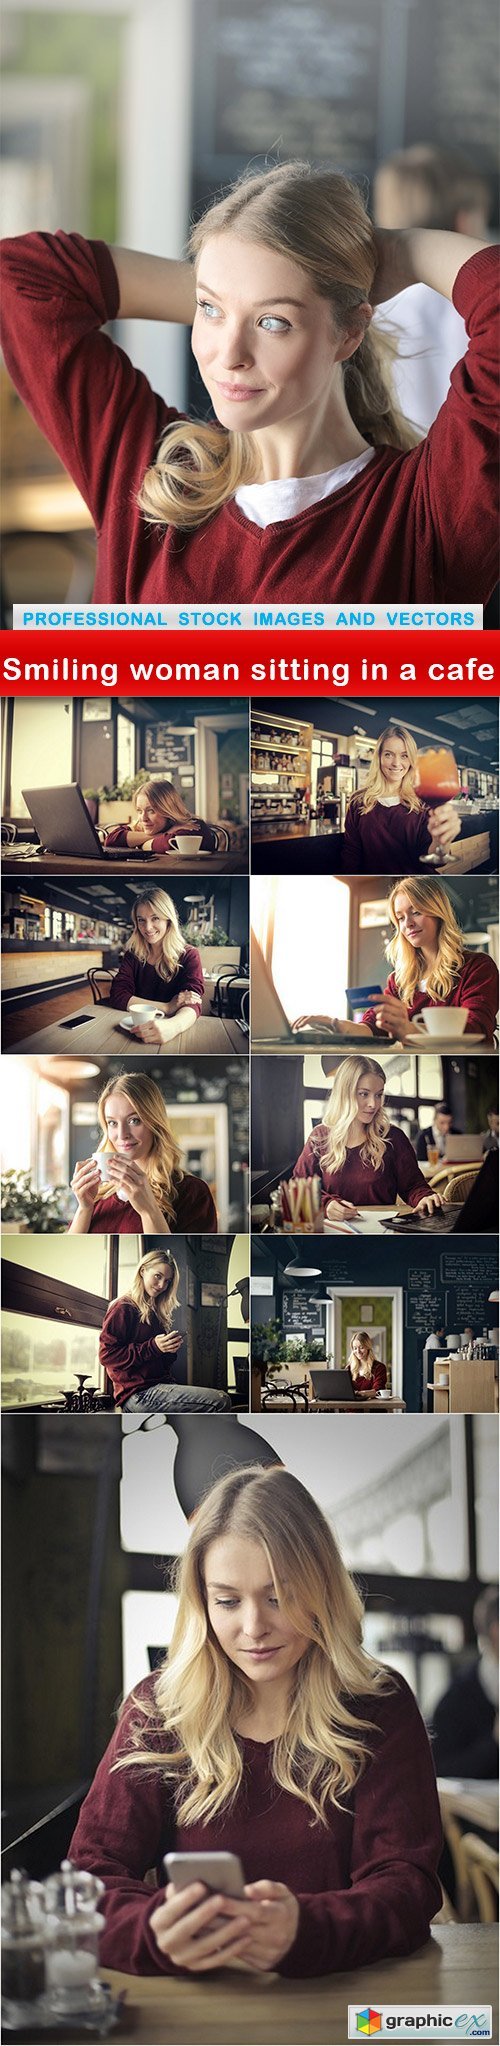 Smiling woman sitting in a cafe - 10 UHQ JPEG